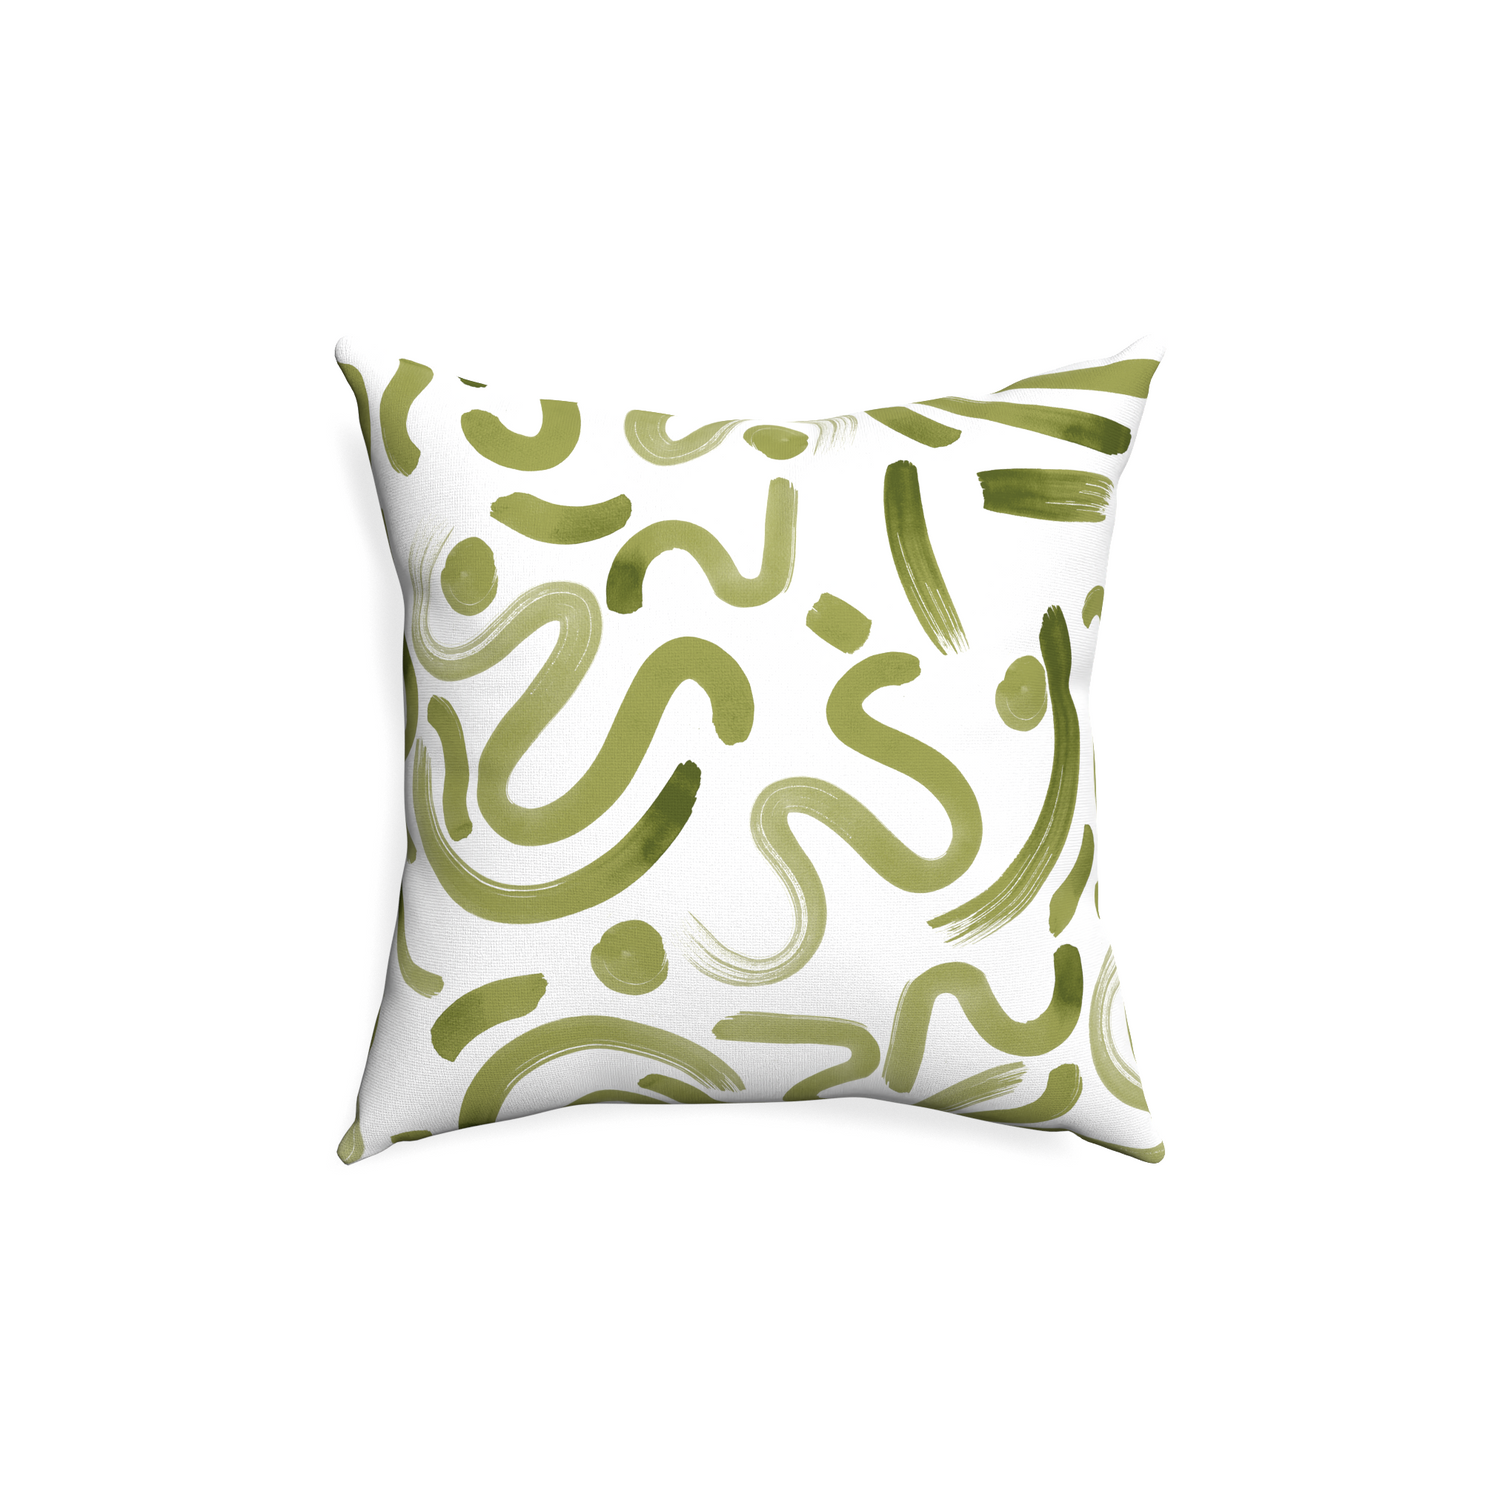 18-square hockney moss custom moss greenpillow with none on white background